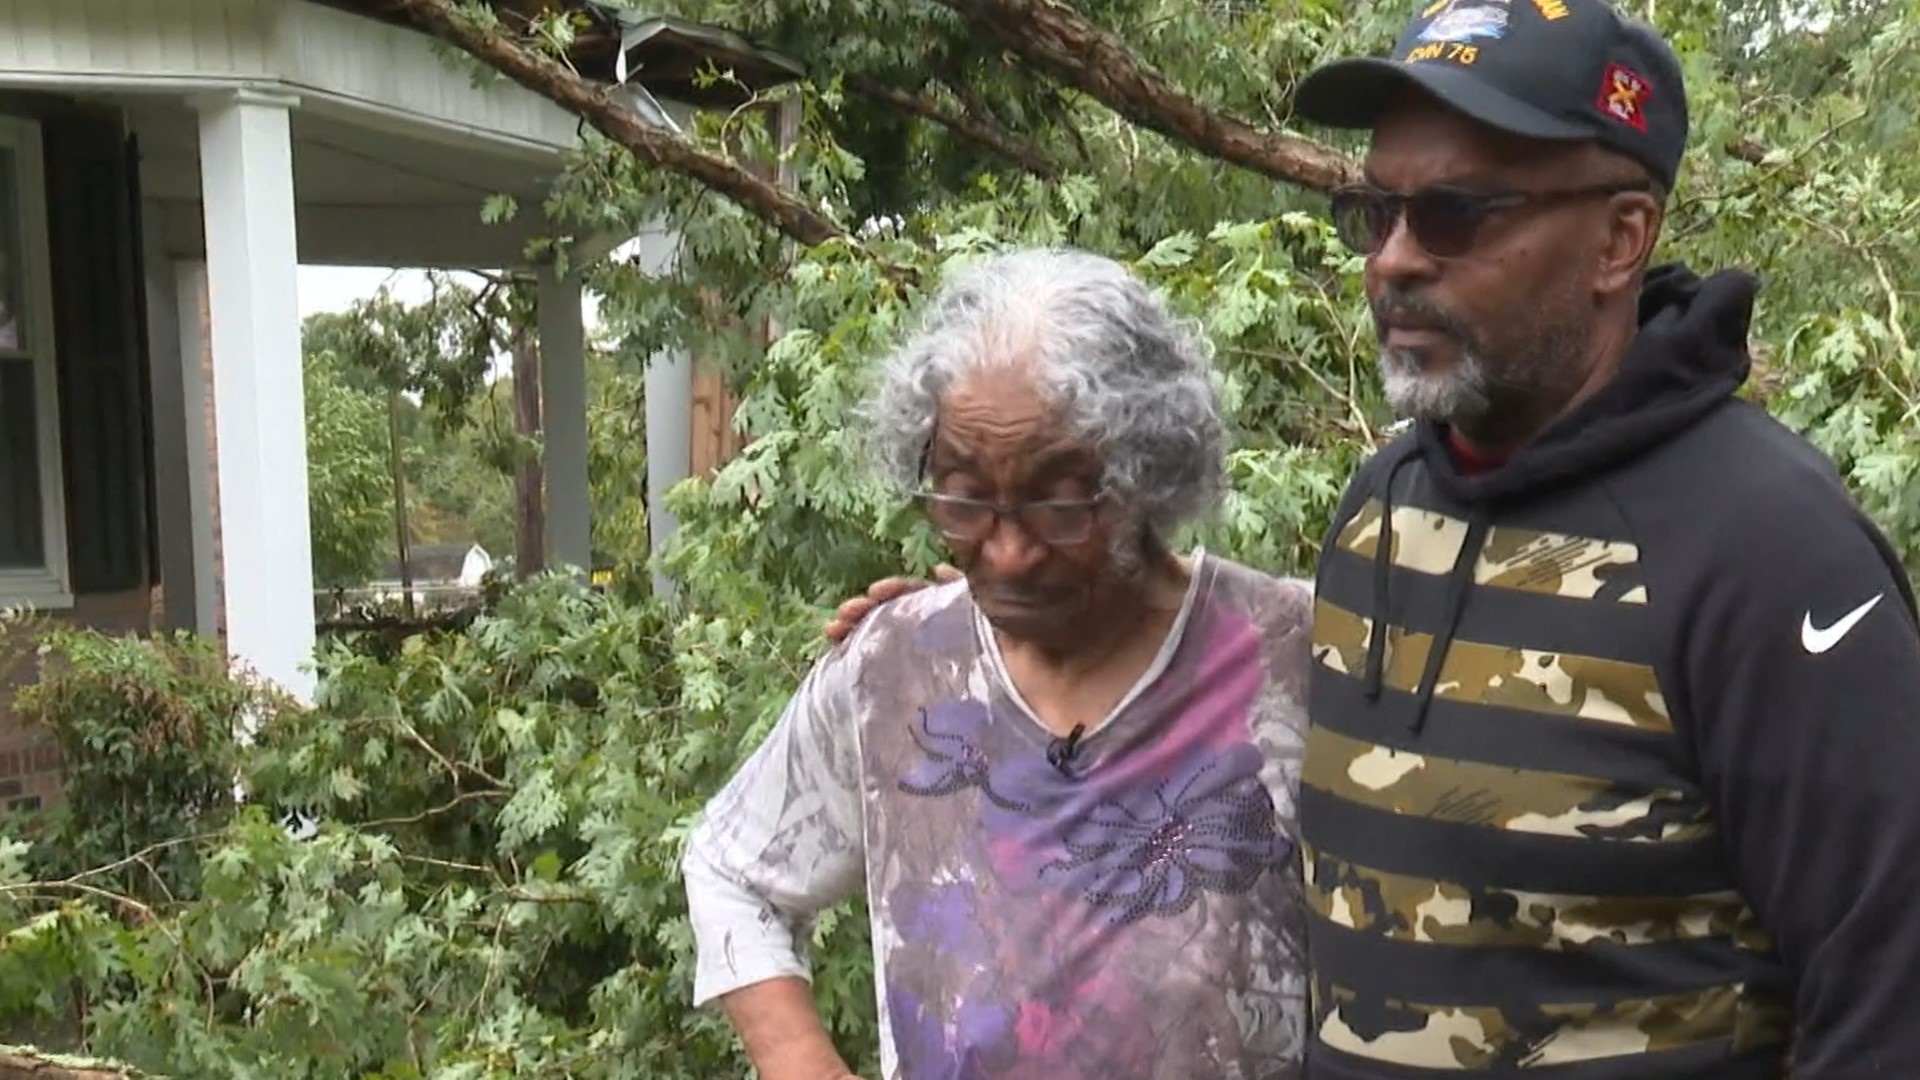 86-year-old Daisy Thompson was not home when the tree came down on her home.